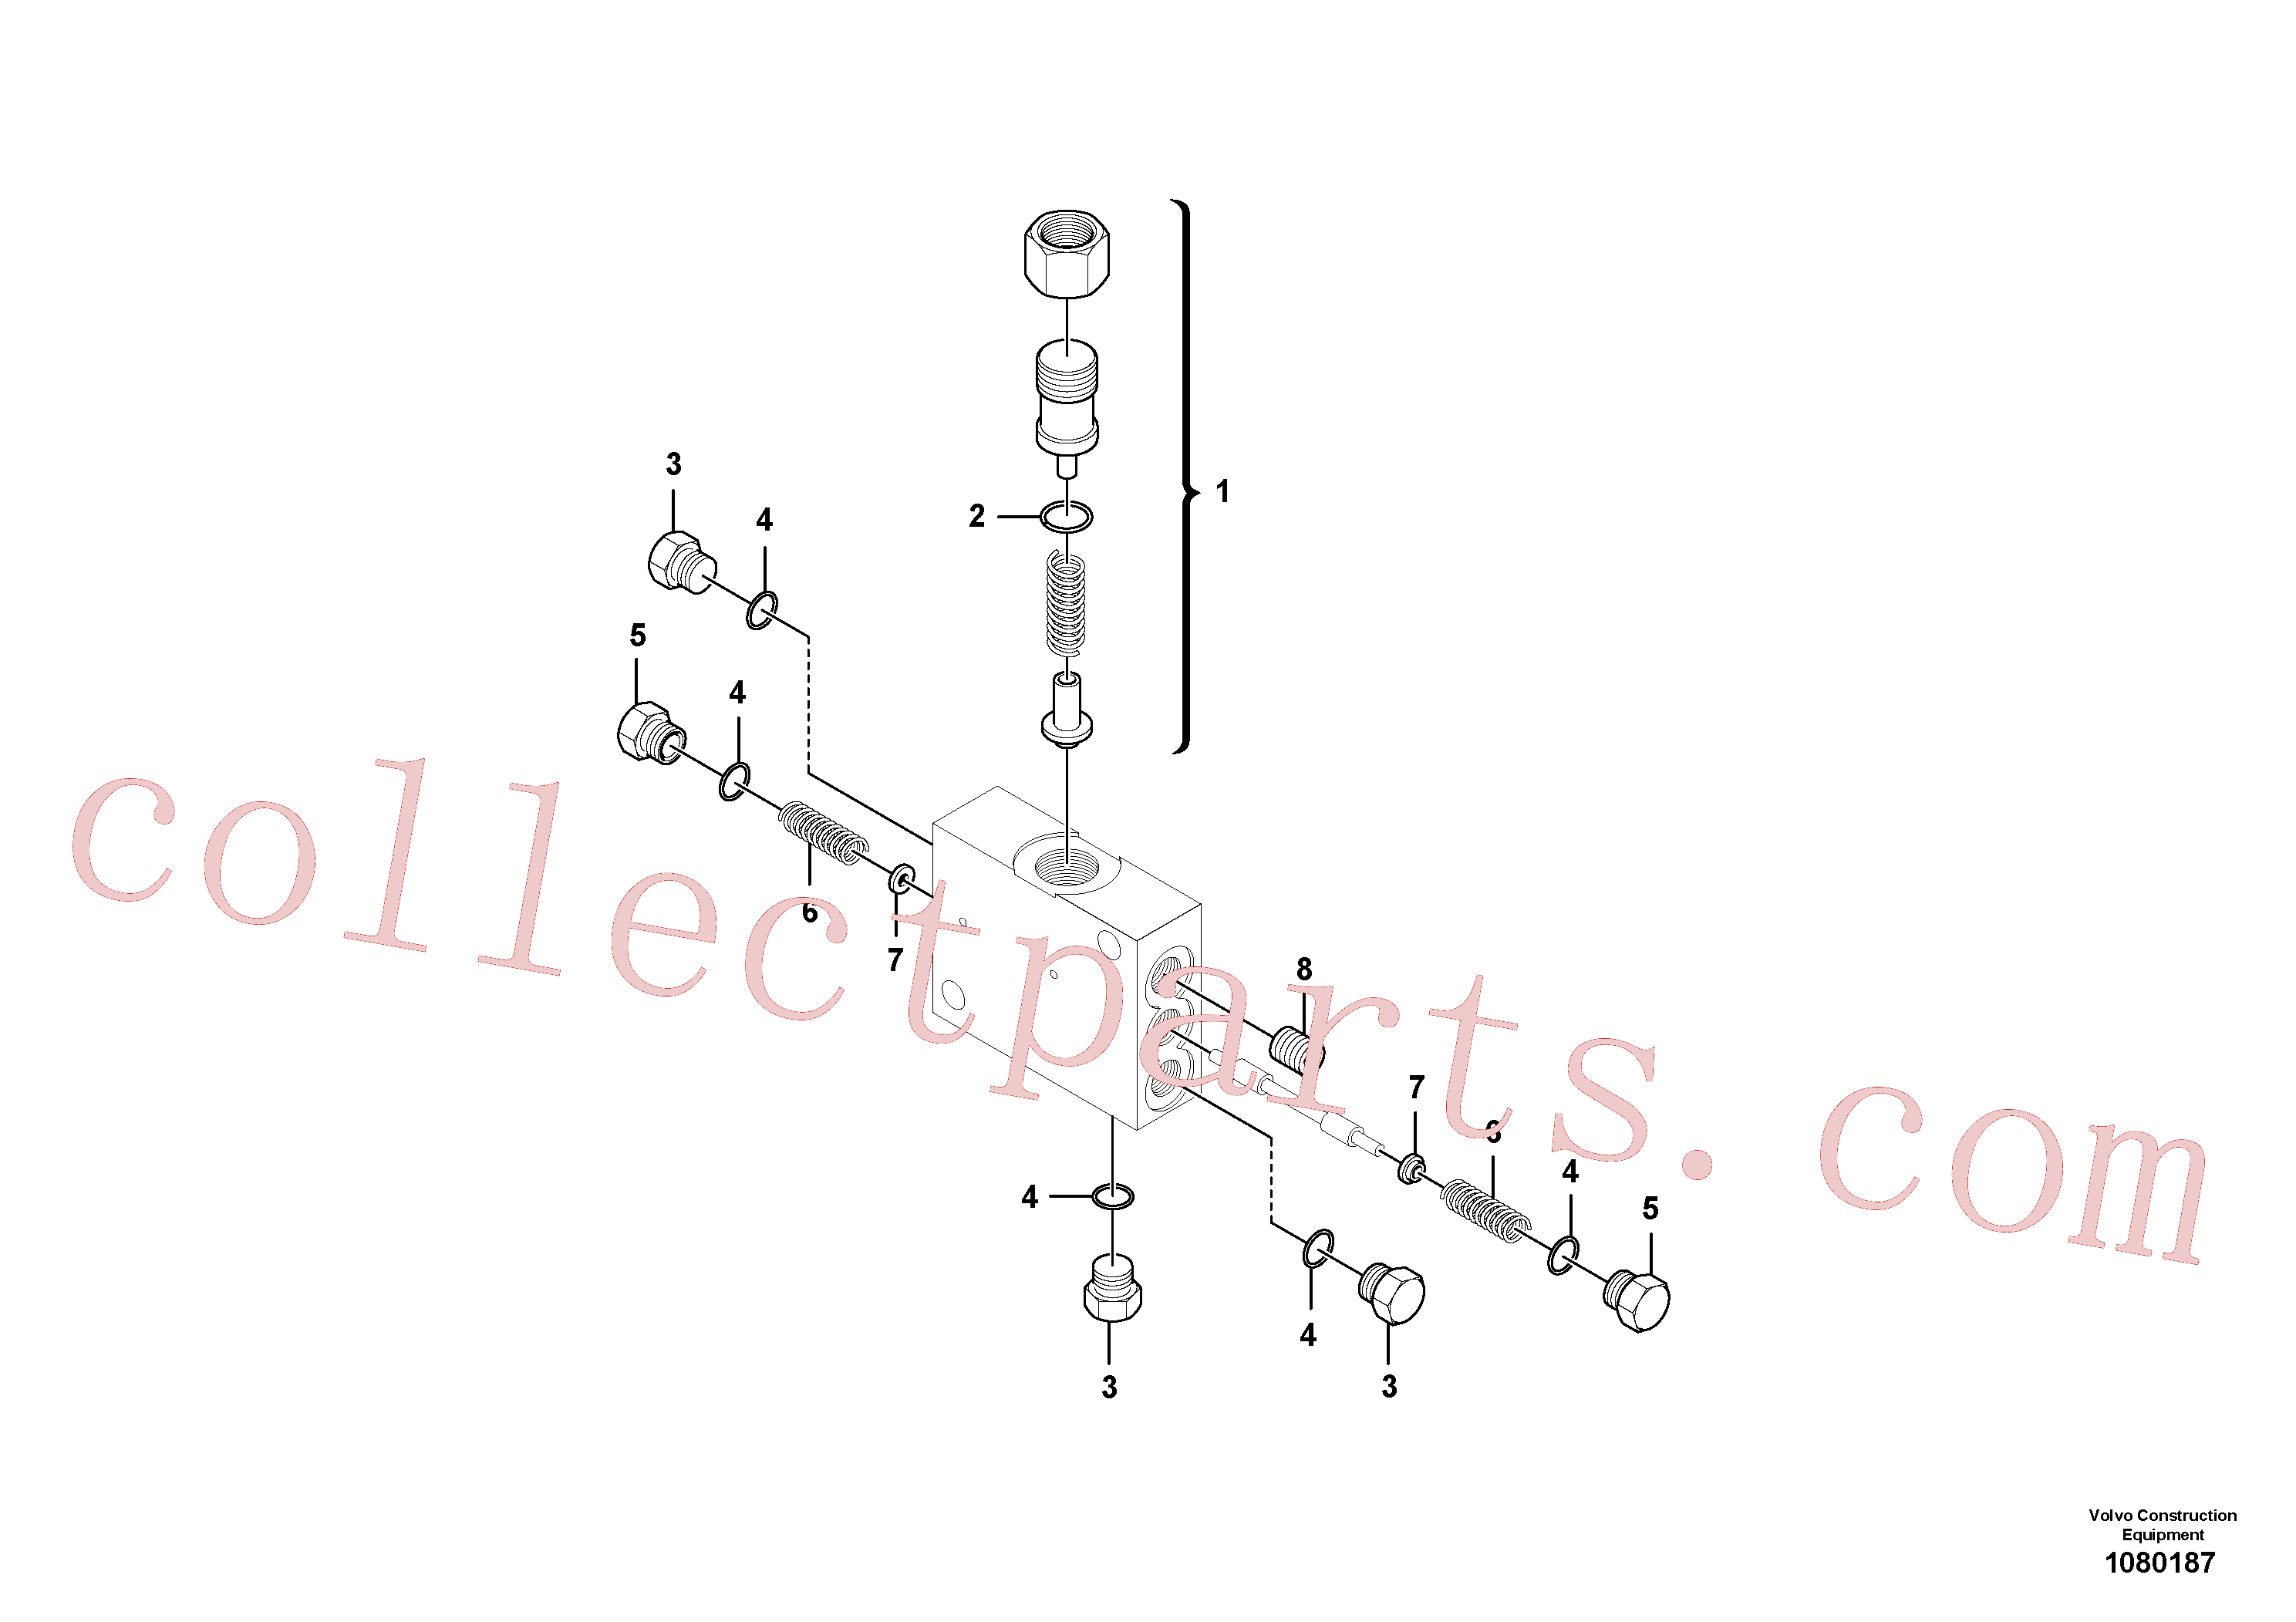 RM59933622 for Volvo Loop Flushing Valve Assembly(1080187 assembly)